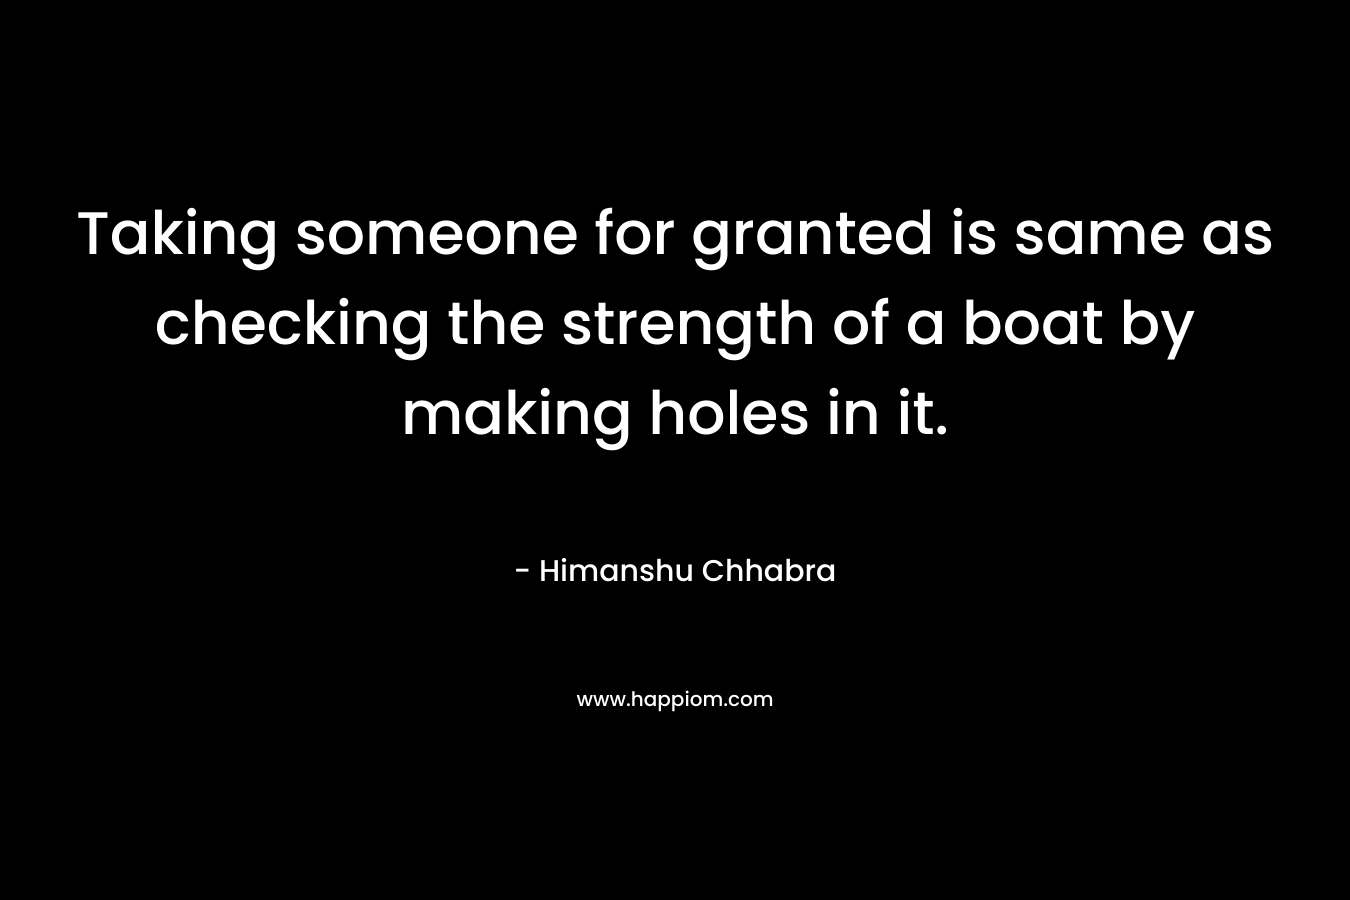 Taking someone for granted is same as checking the strength of a boat by making holes in it. – Himanshu Chhabra